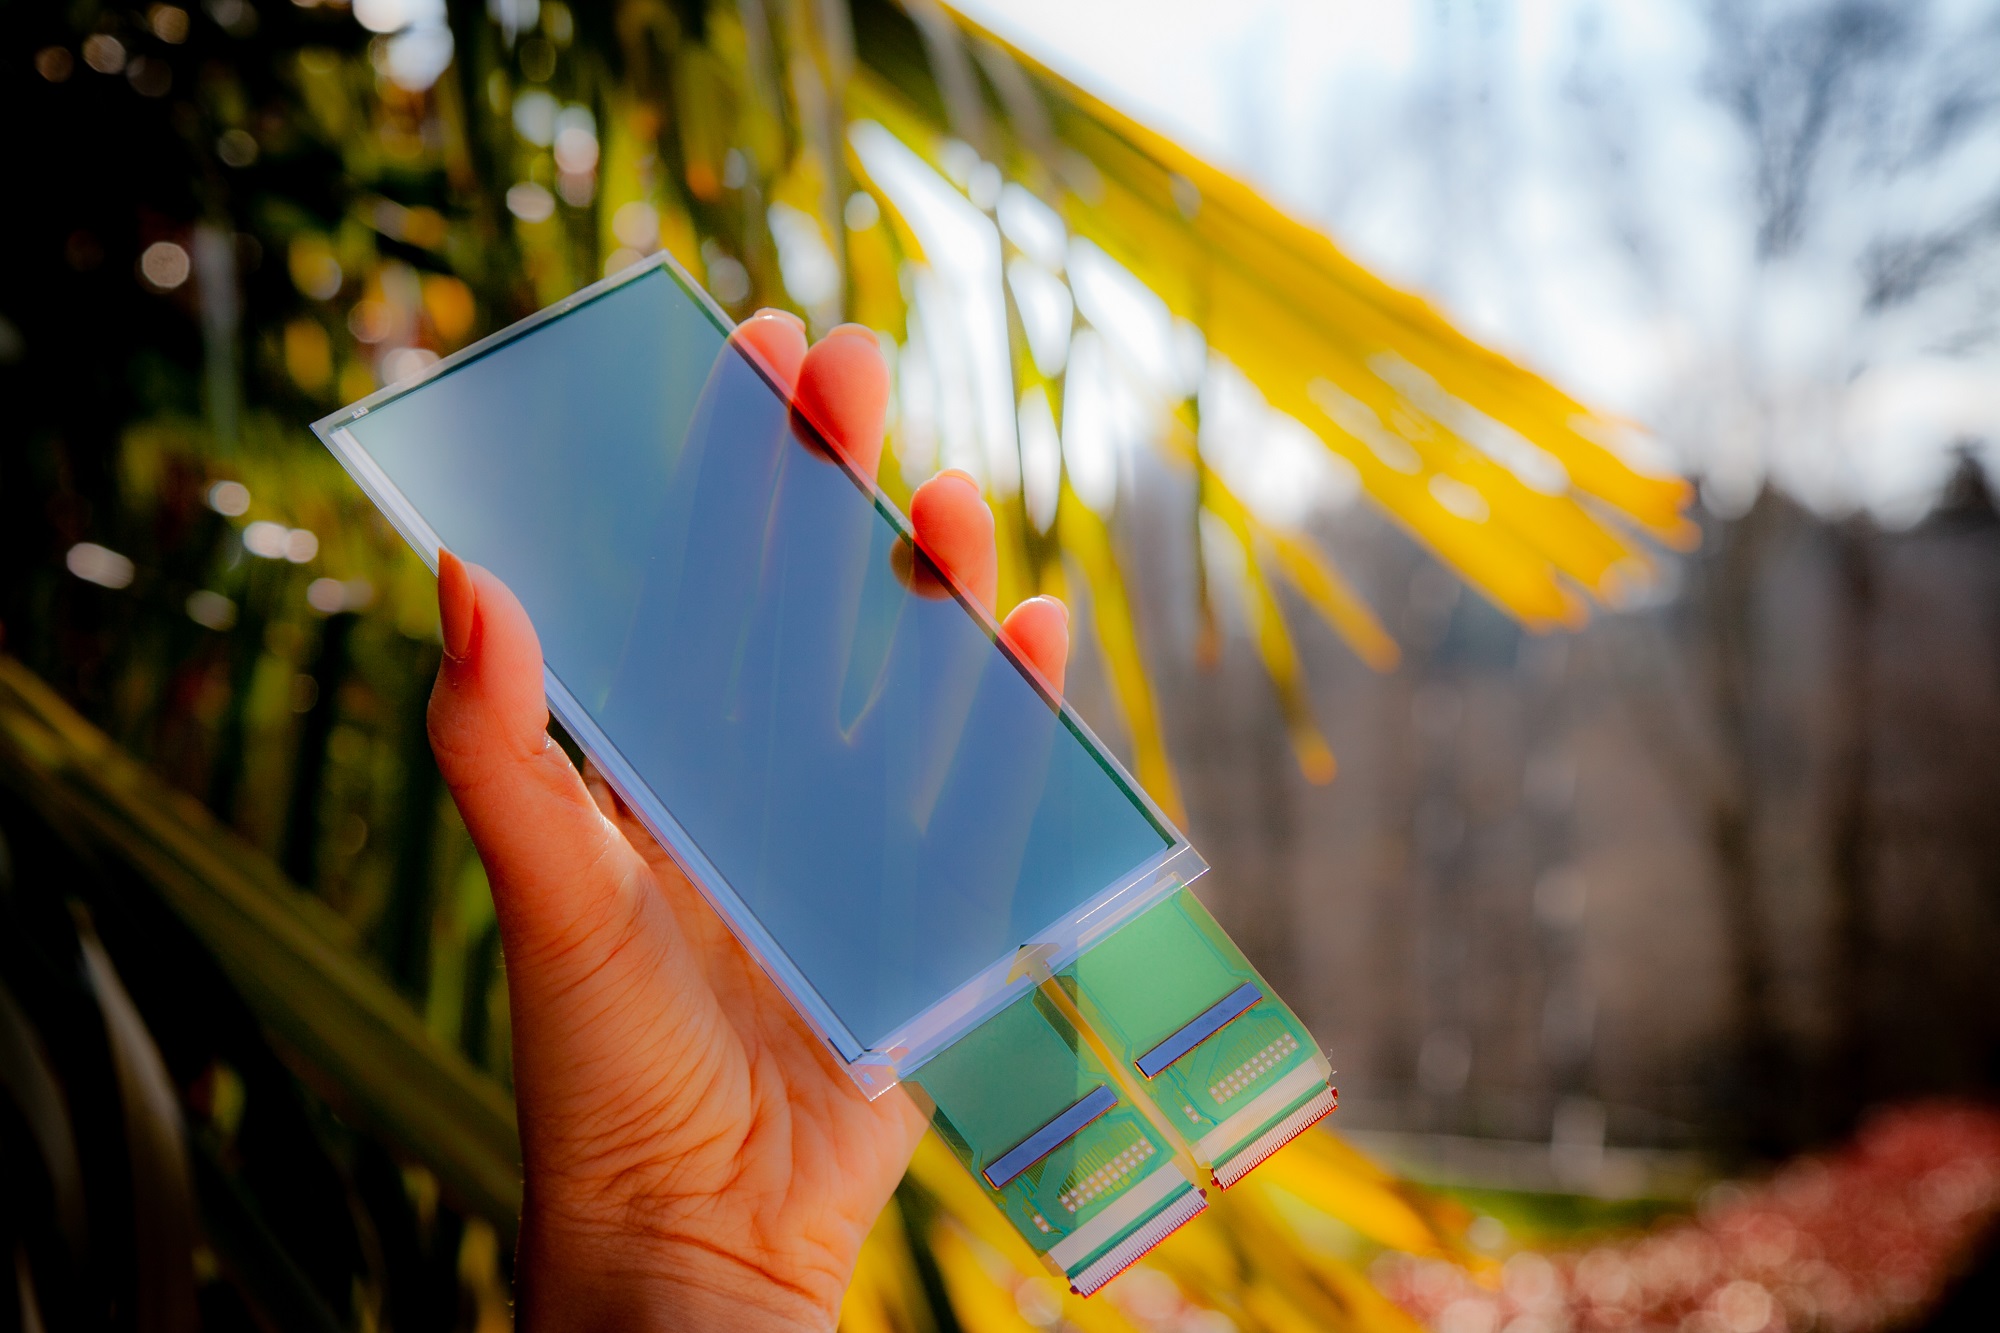 Thin film multi-fingerprint optical sensor is able to detect prints across the entire surface of a smartphone screen